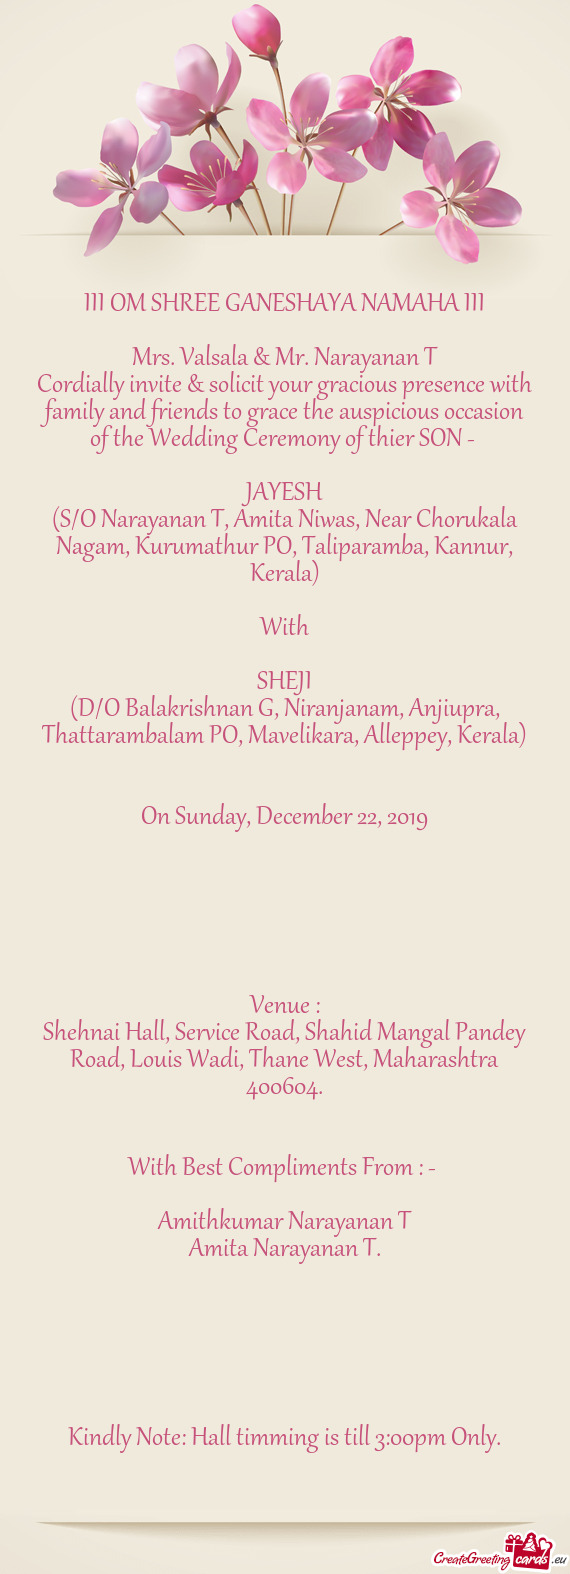 Cordially invite & solicit your gracious presence with family and friends to grace the auspicious oc